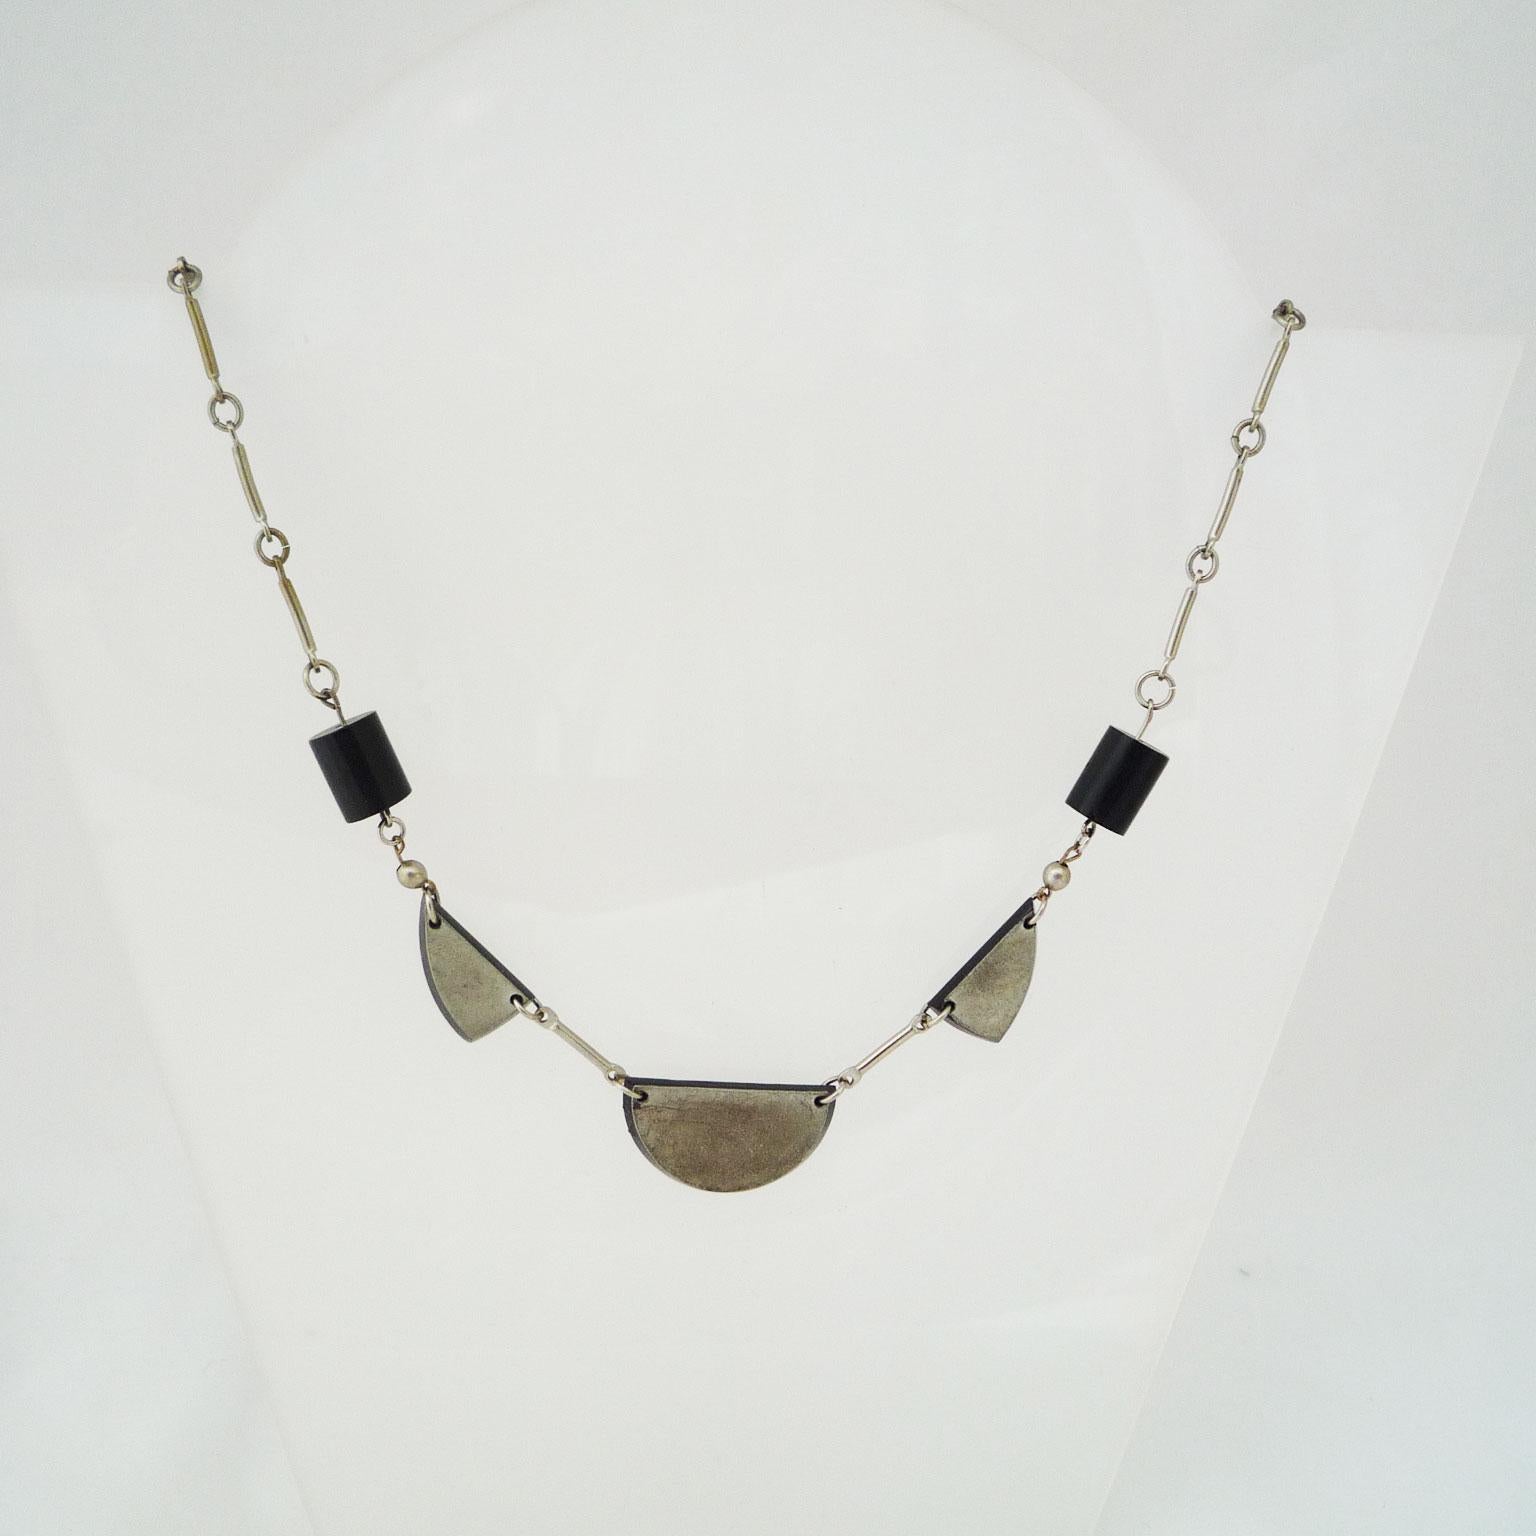 Collier in Chrome and Galalith by Jakob Bengel, around 1920/30

Necklace of the famous jewellery manufacturer Jakob Bengel from Idar-Oberstein, black galalith elements on a chrome chain.
The middle elements are coated silver on the front side.
The